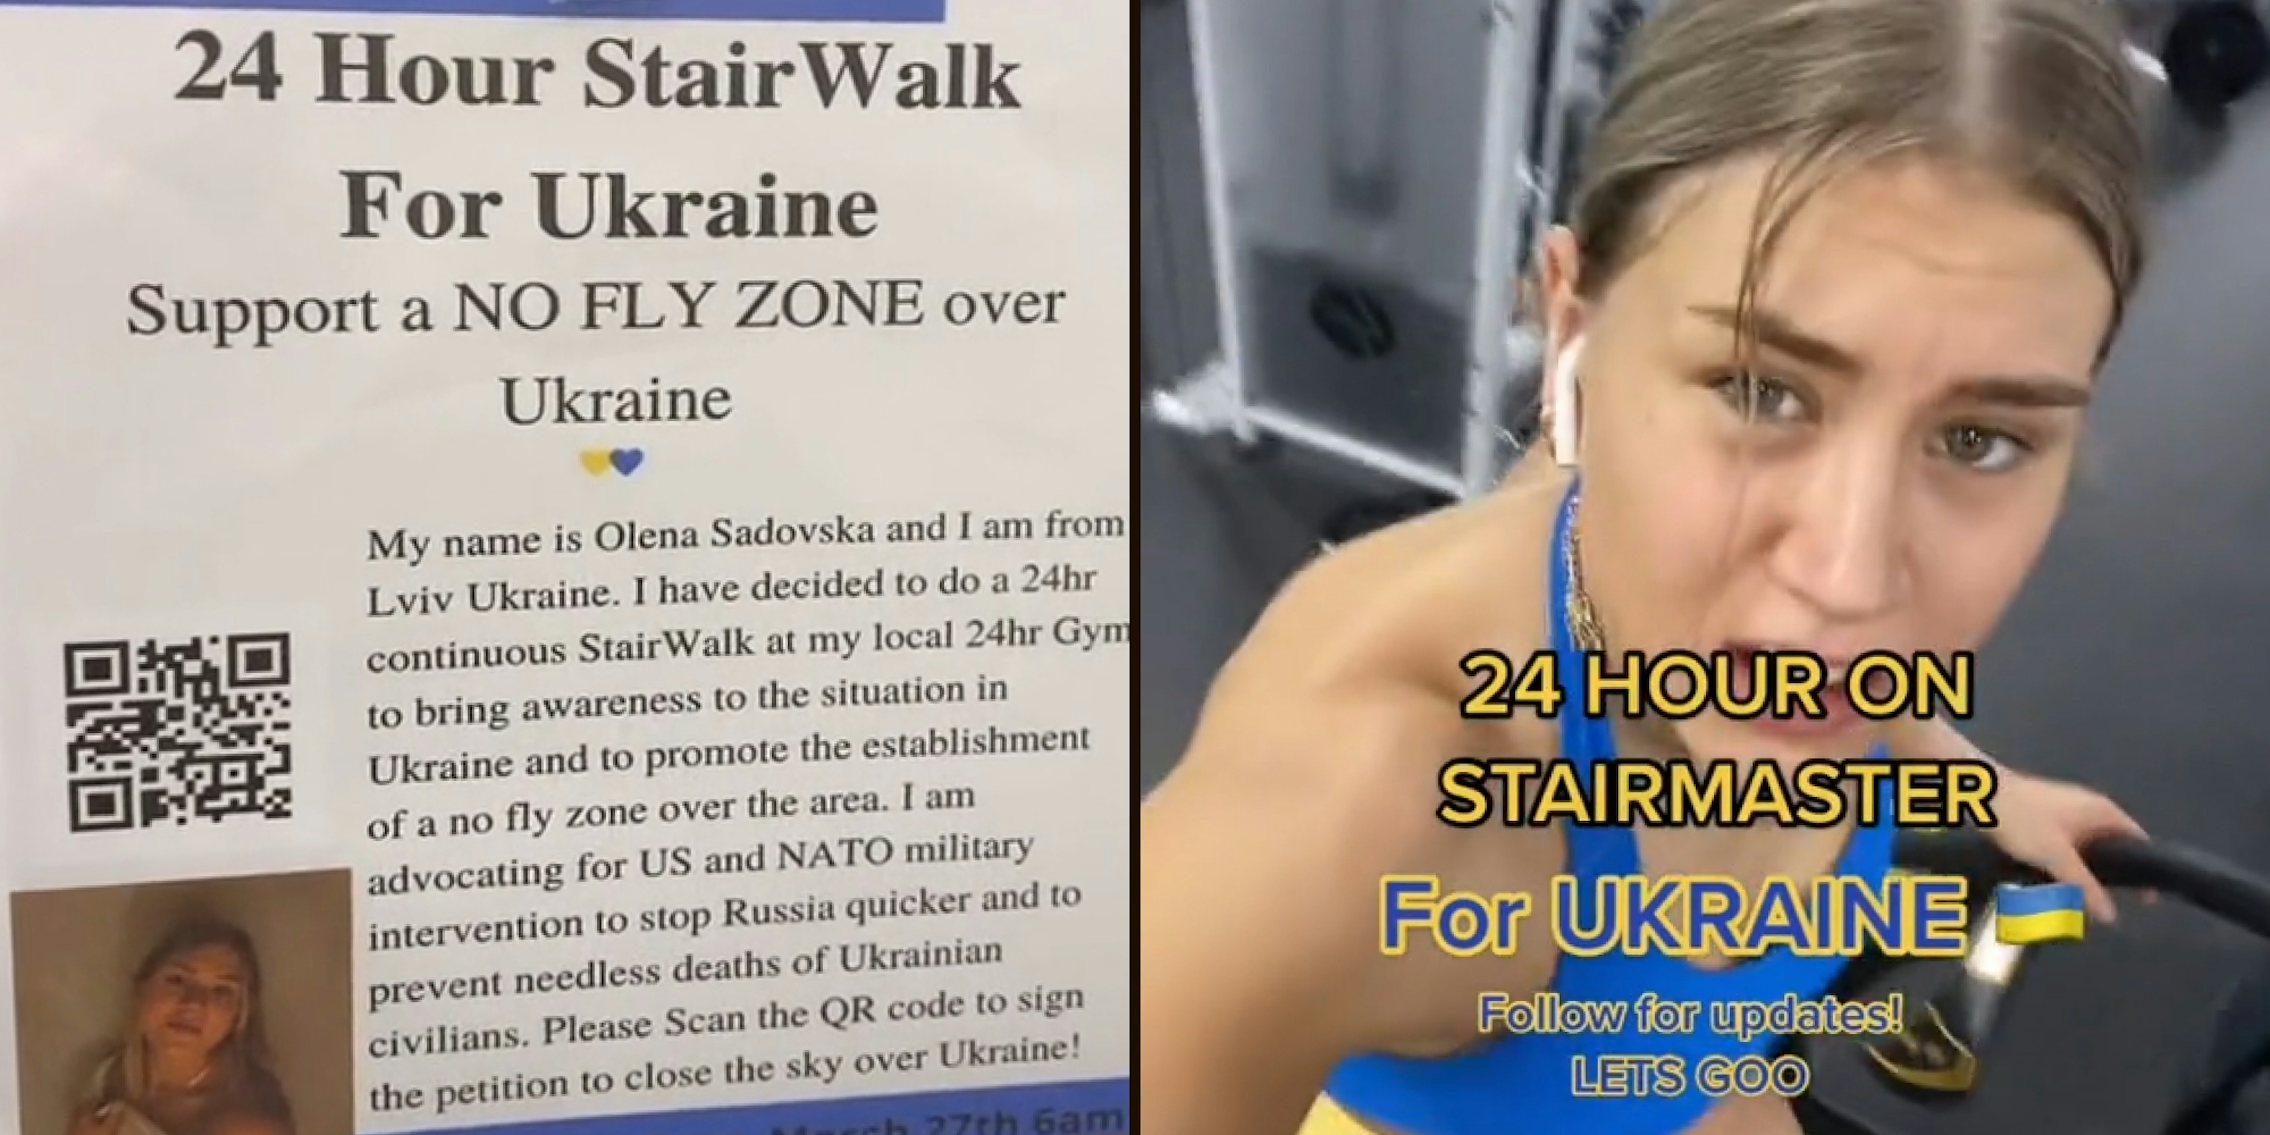 For Ukraine 24 hour stair walk support a no fly zone over Ukraine poster woman made(l) Woman on stairmaster at gym caption '24 hour on stairmaster for Ukraine follow for updates! LETS GOO' (r)